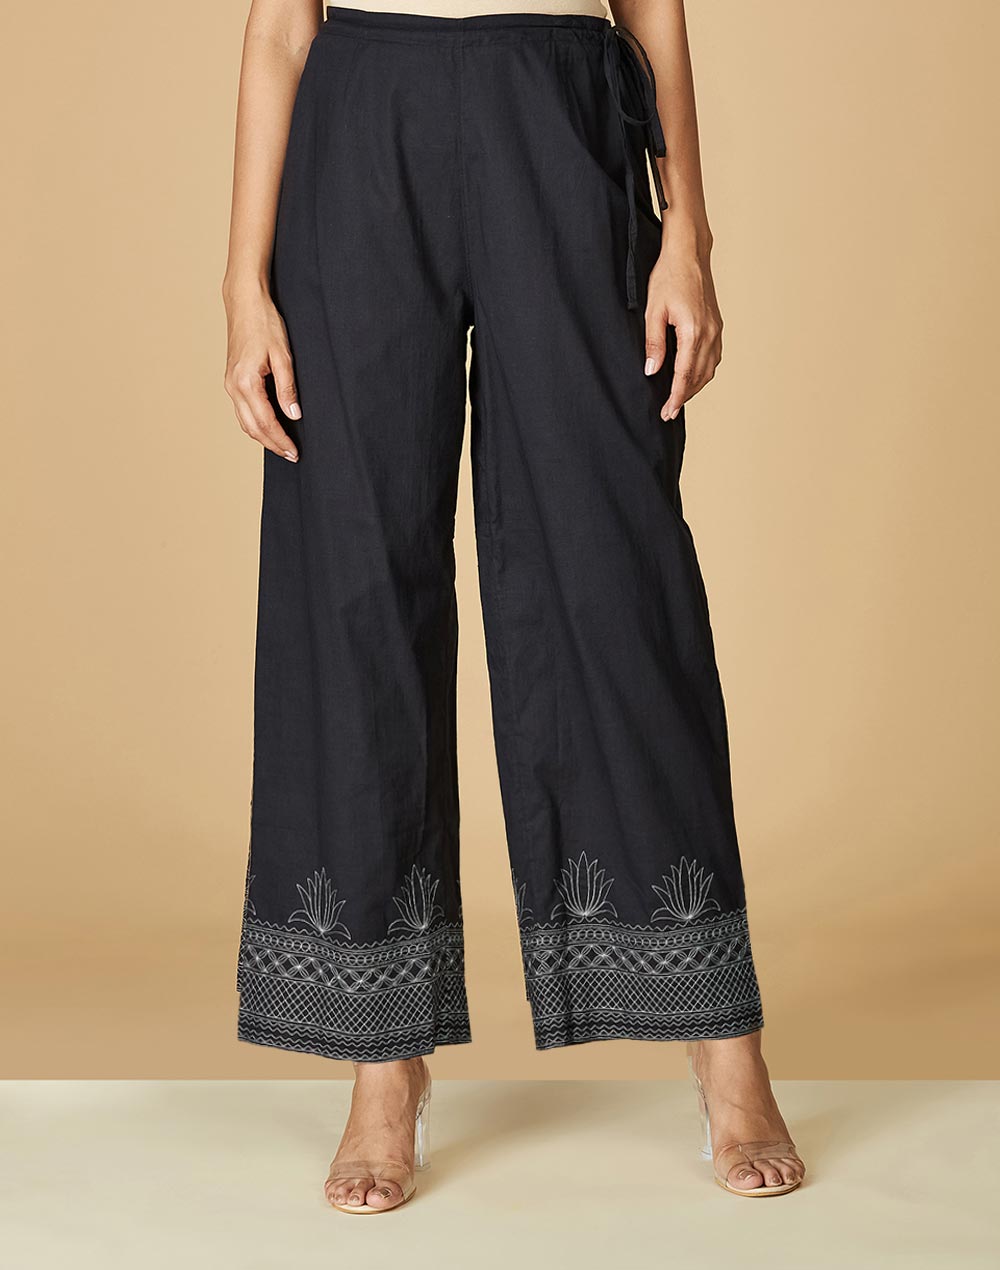 Buy Black Cotton Embroidered Ijar Pant for Women Online at